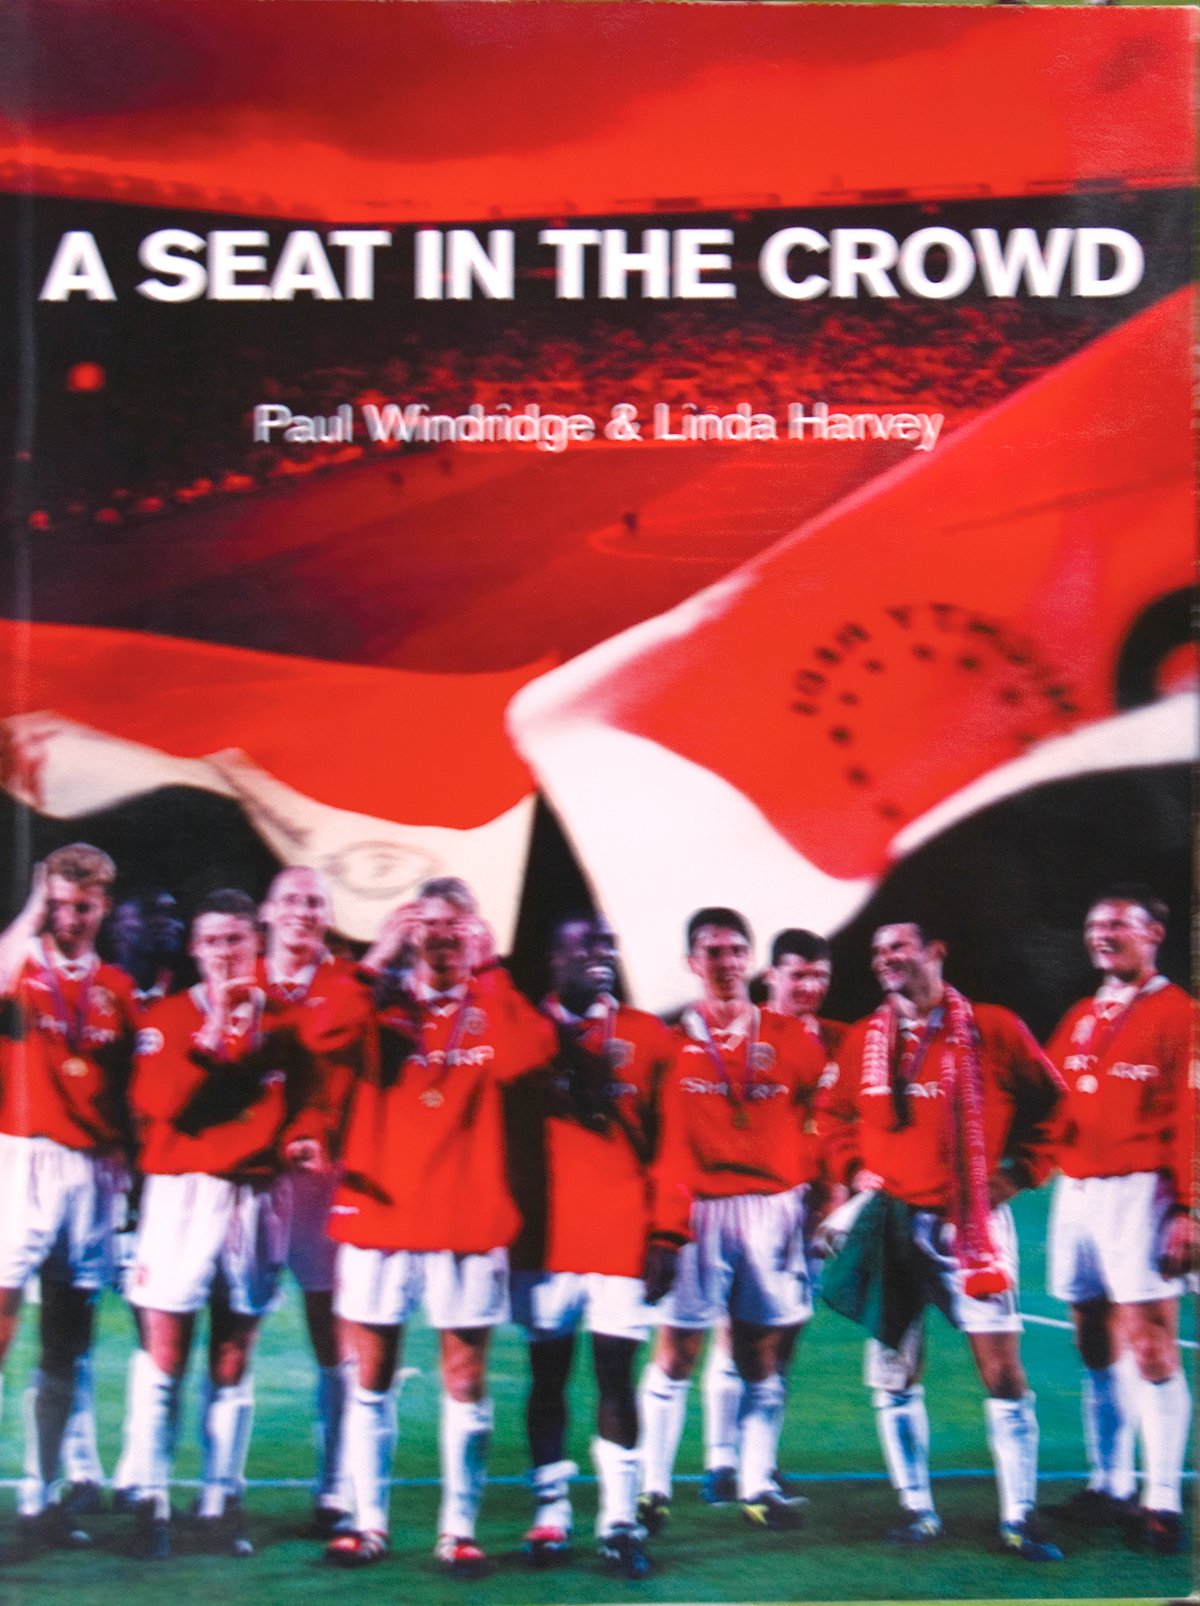 Image of A Seat in The Crowd by Paul Windridge & Linda Harvey